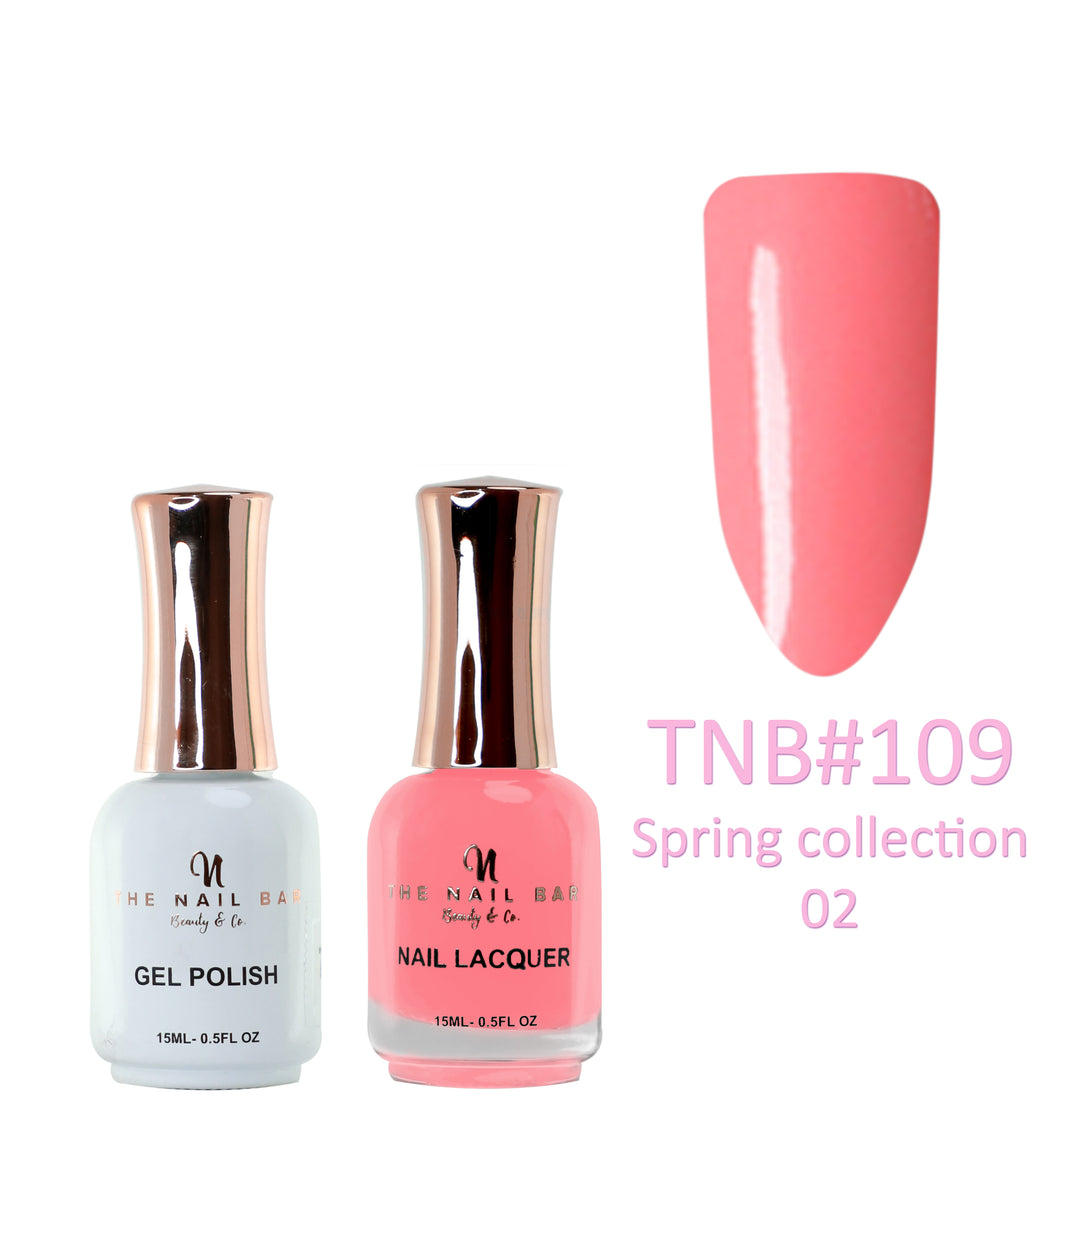 Dual Polish/Gel colour matching (15ml) - Spring collection 02